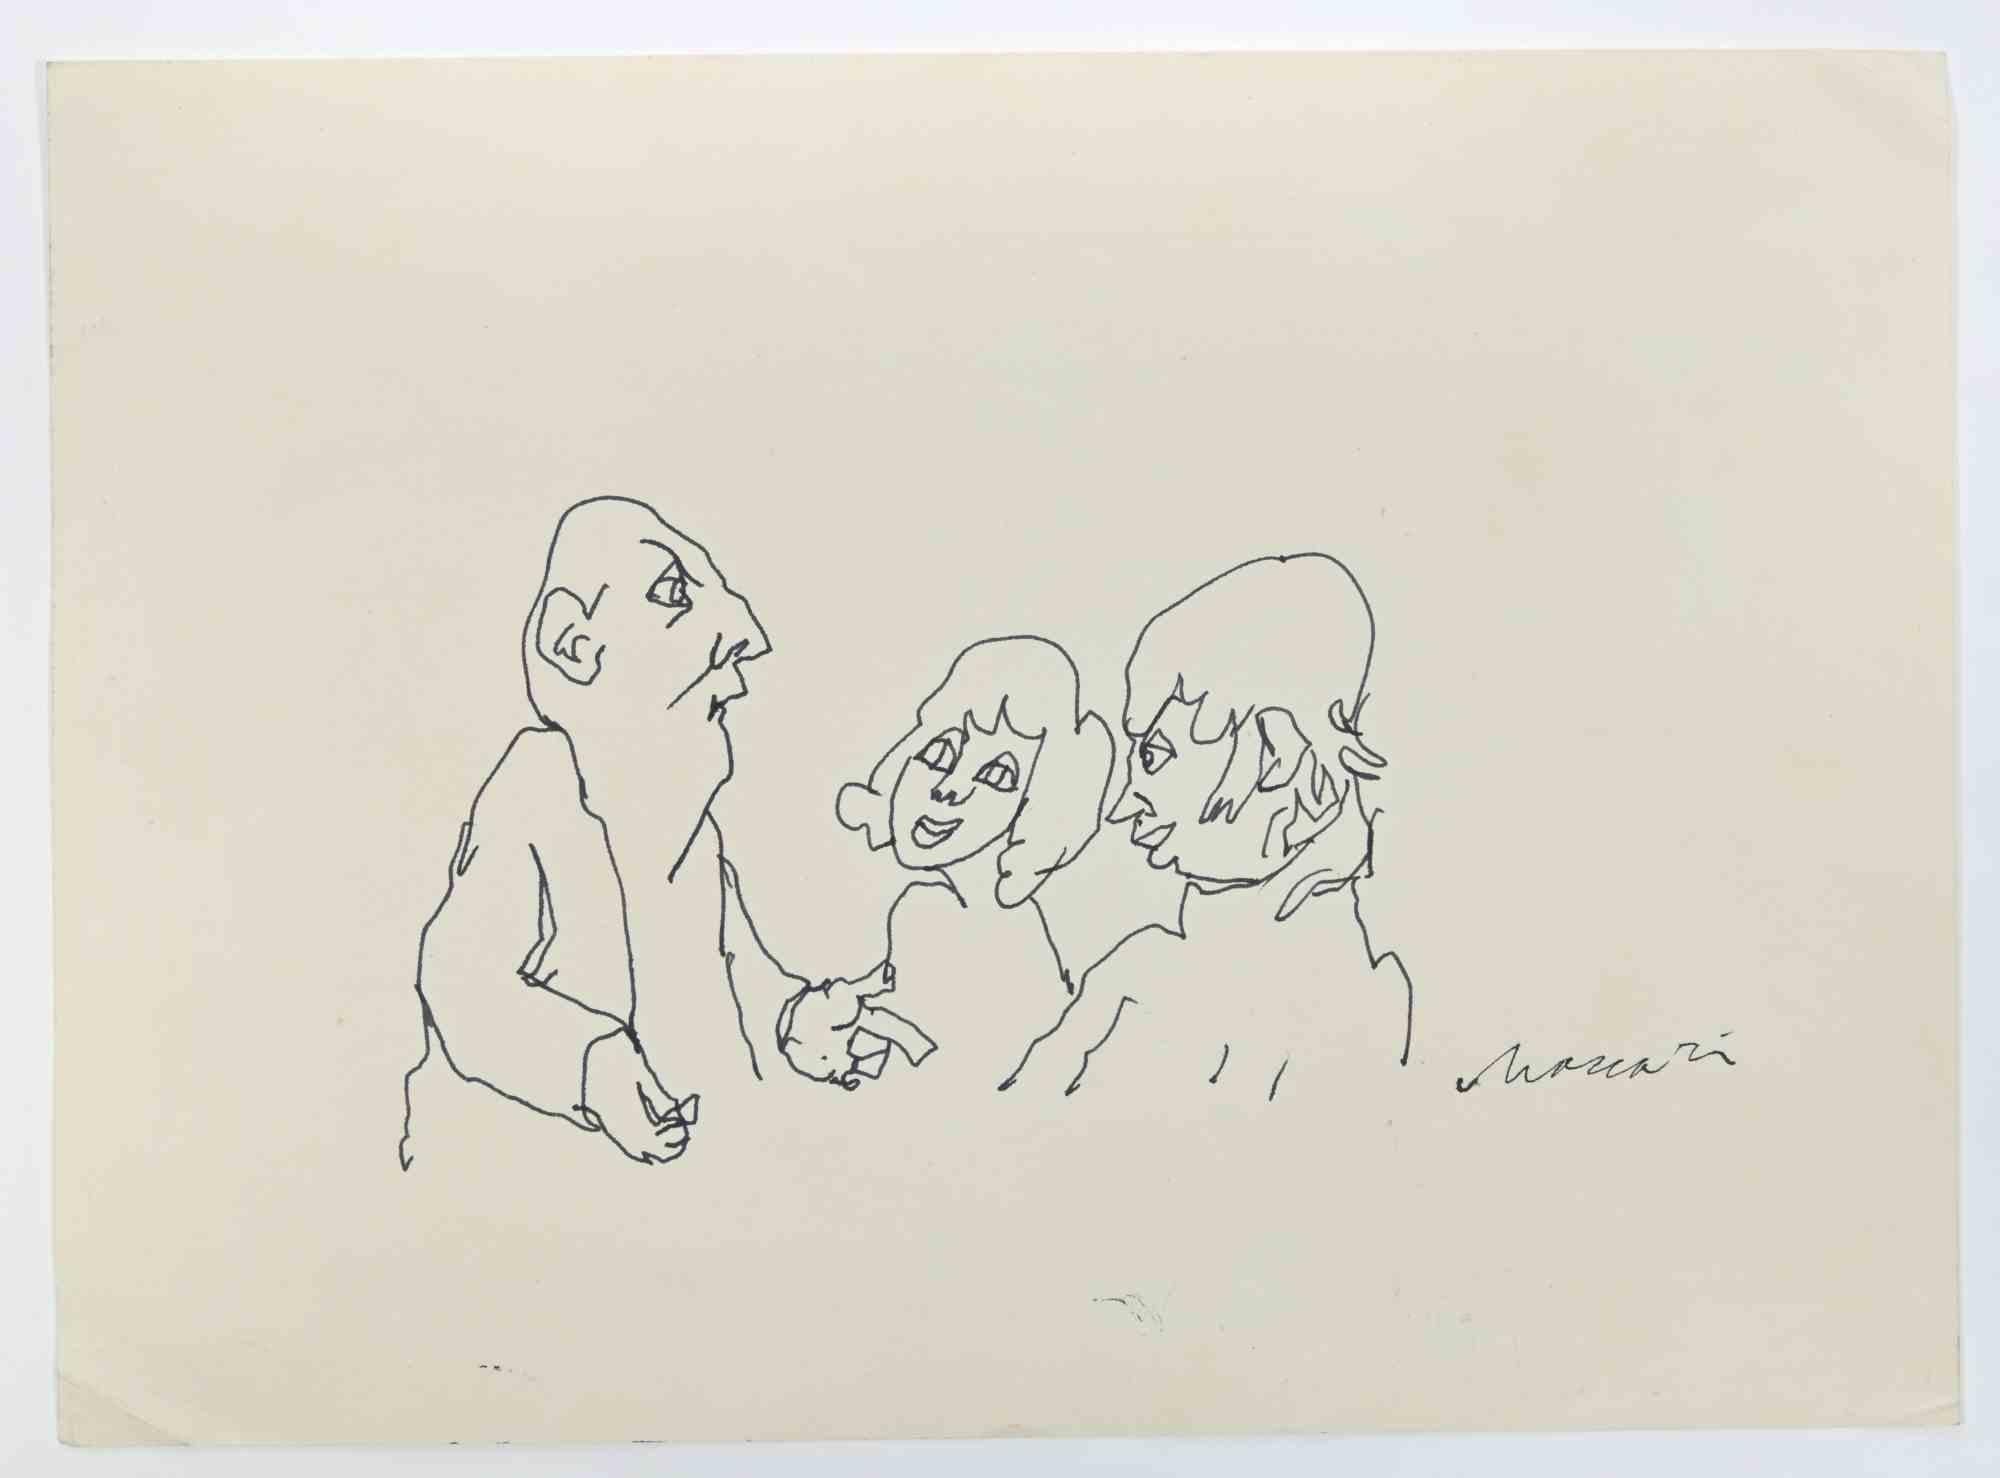 Figures is a Pen Drawing realized by Mino Maccari  (1924-1989) in the 1970s.

Hand-signed on the lower margin.

Good condition.

Mino Maccari (Siena, 1924-Rome, June 16, 1989) was an Italian writer, painter, engraver and journalist, winner of the